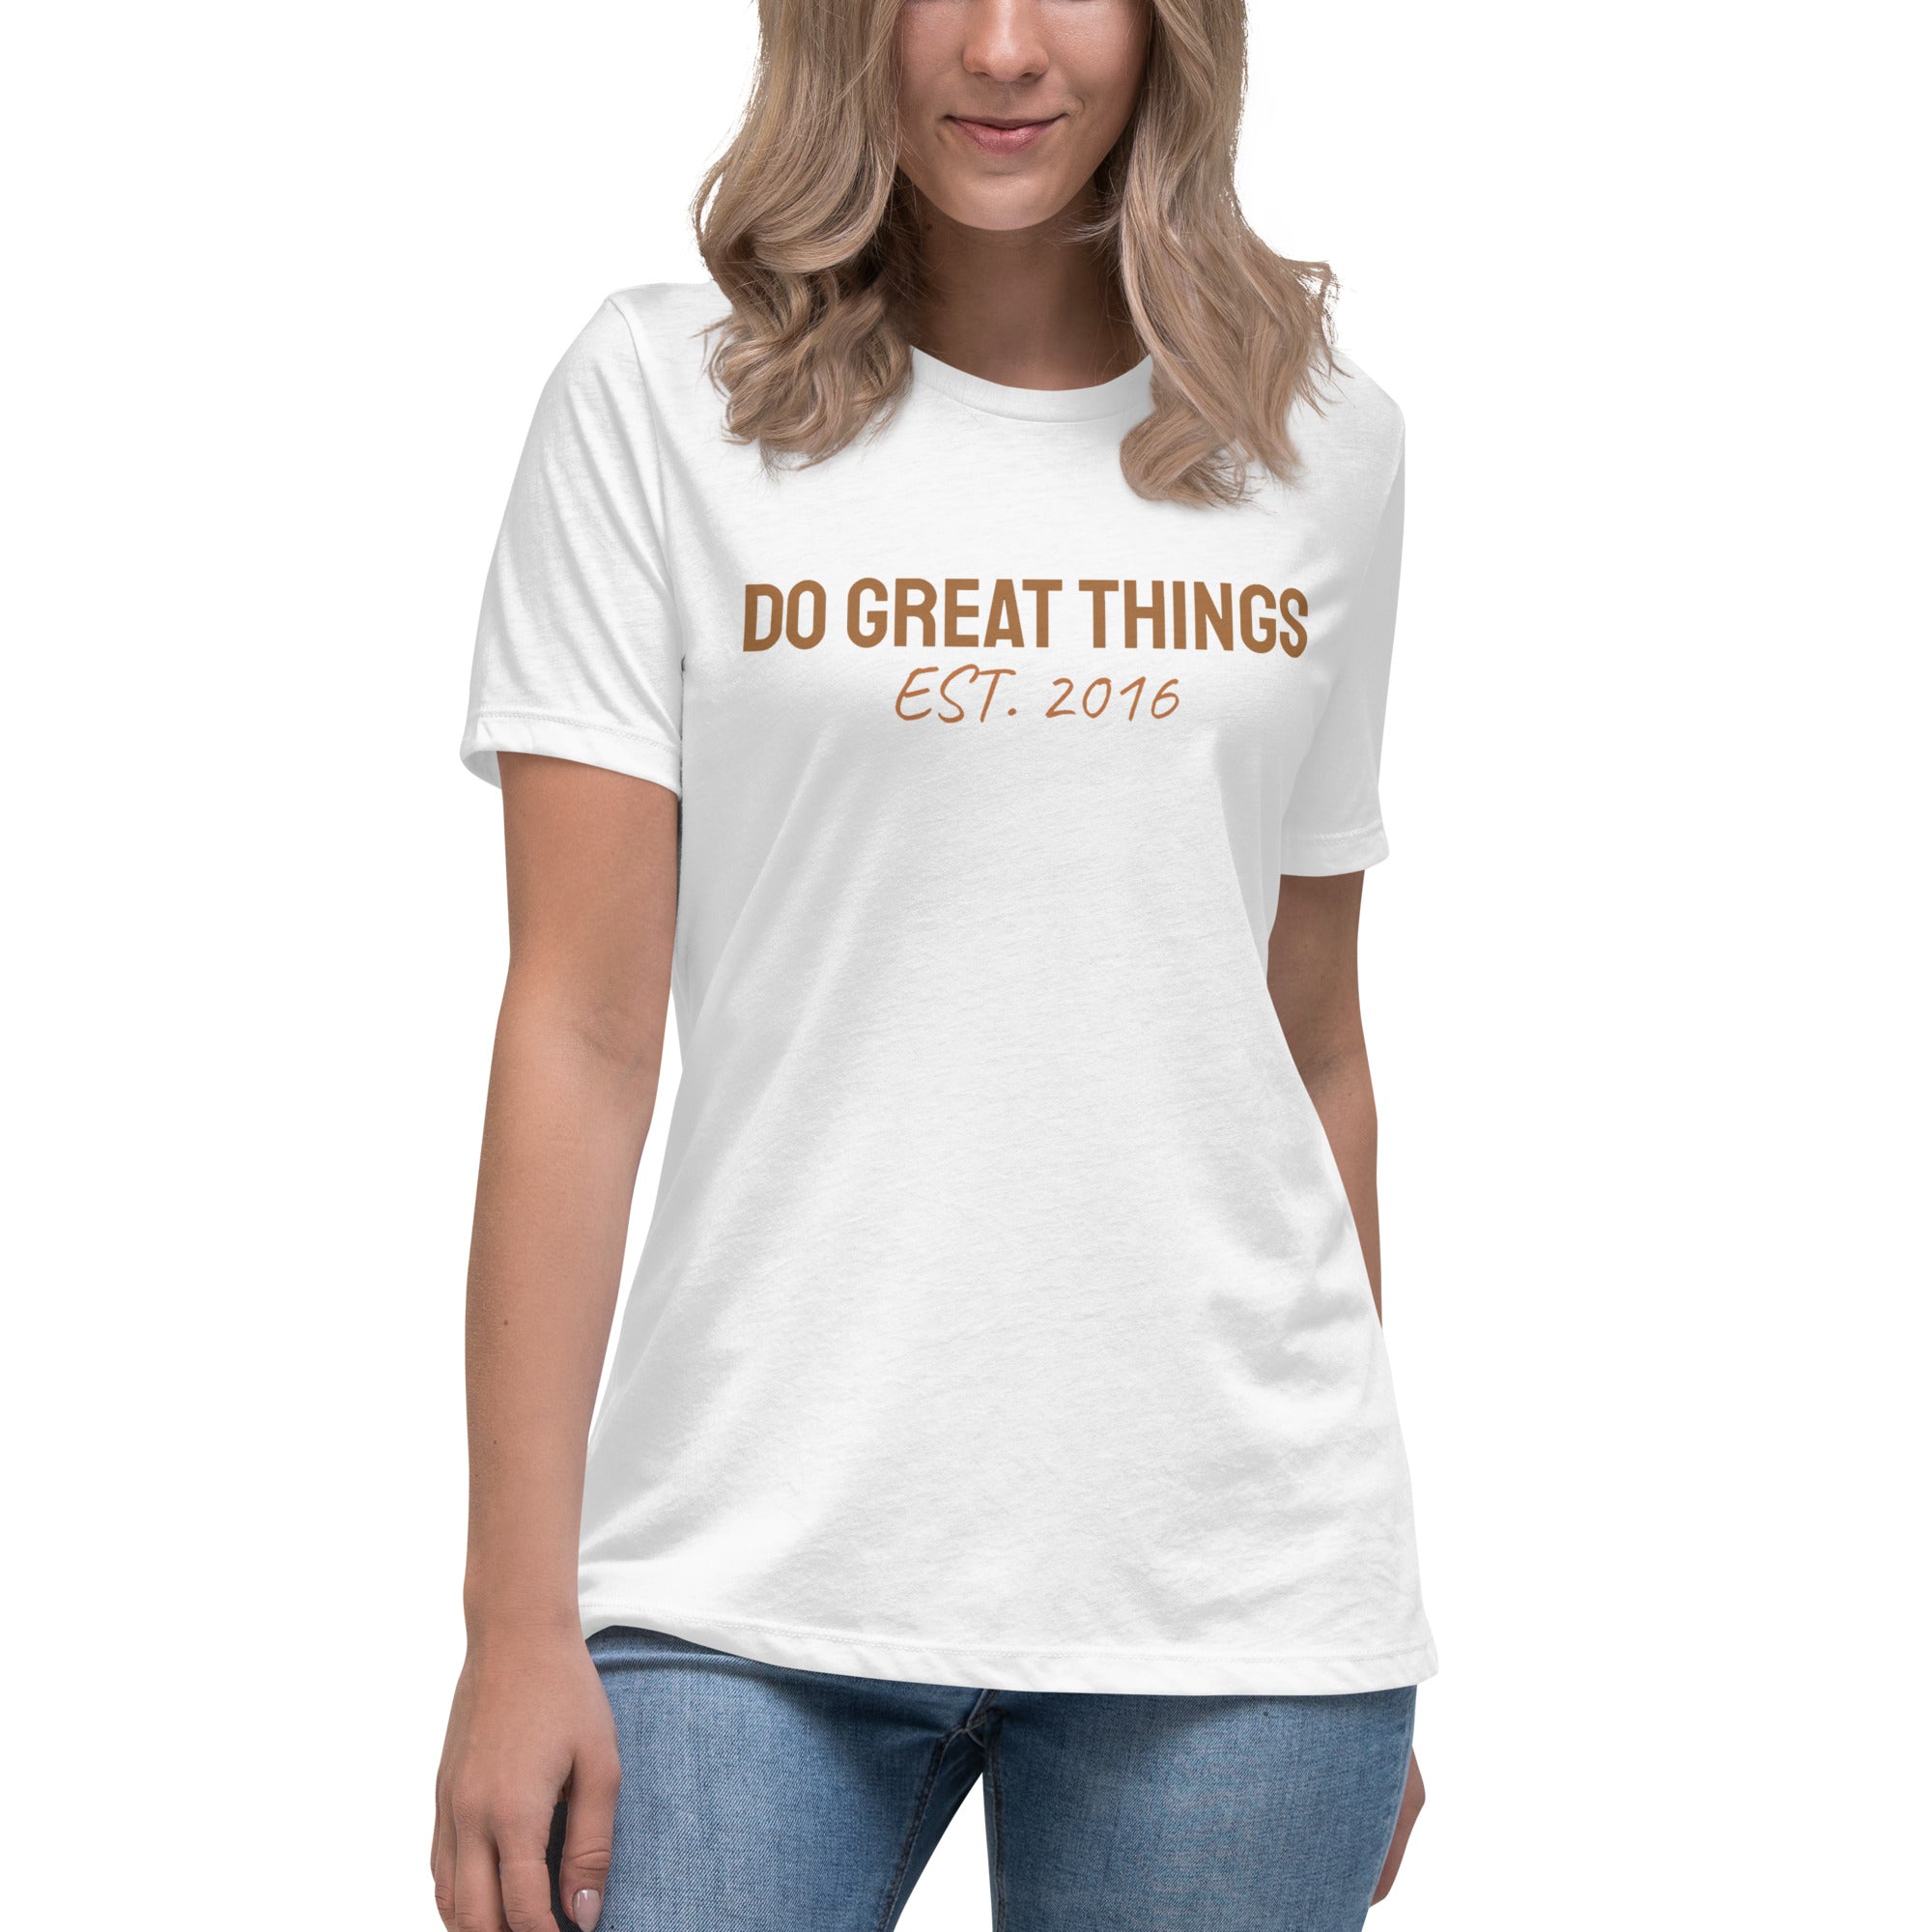 Do Great Things® Women's Relaxed T-Shirt